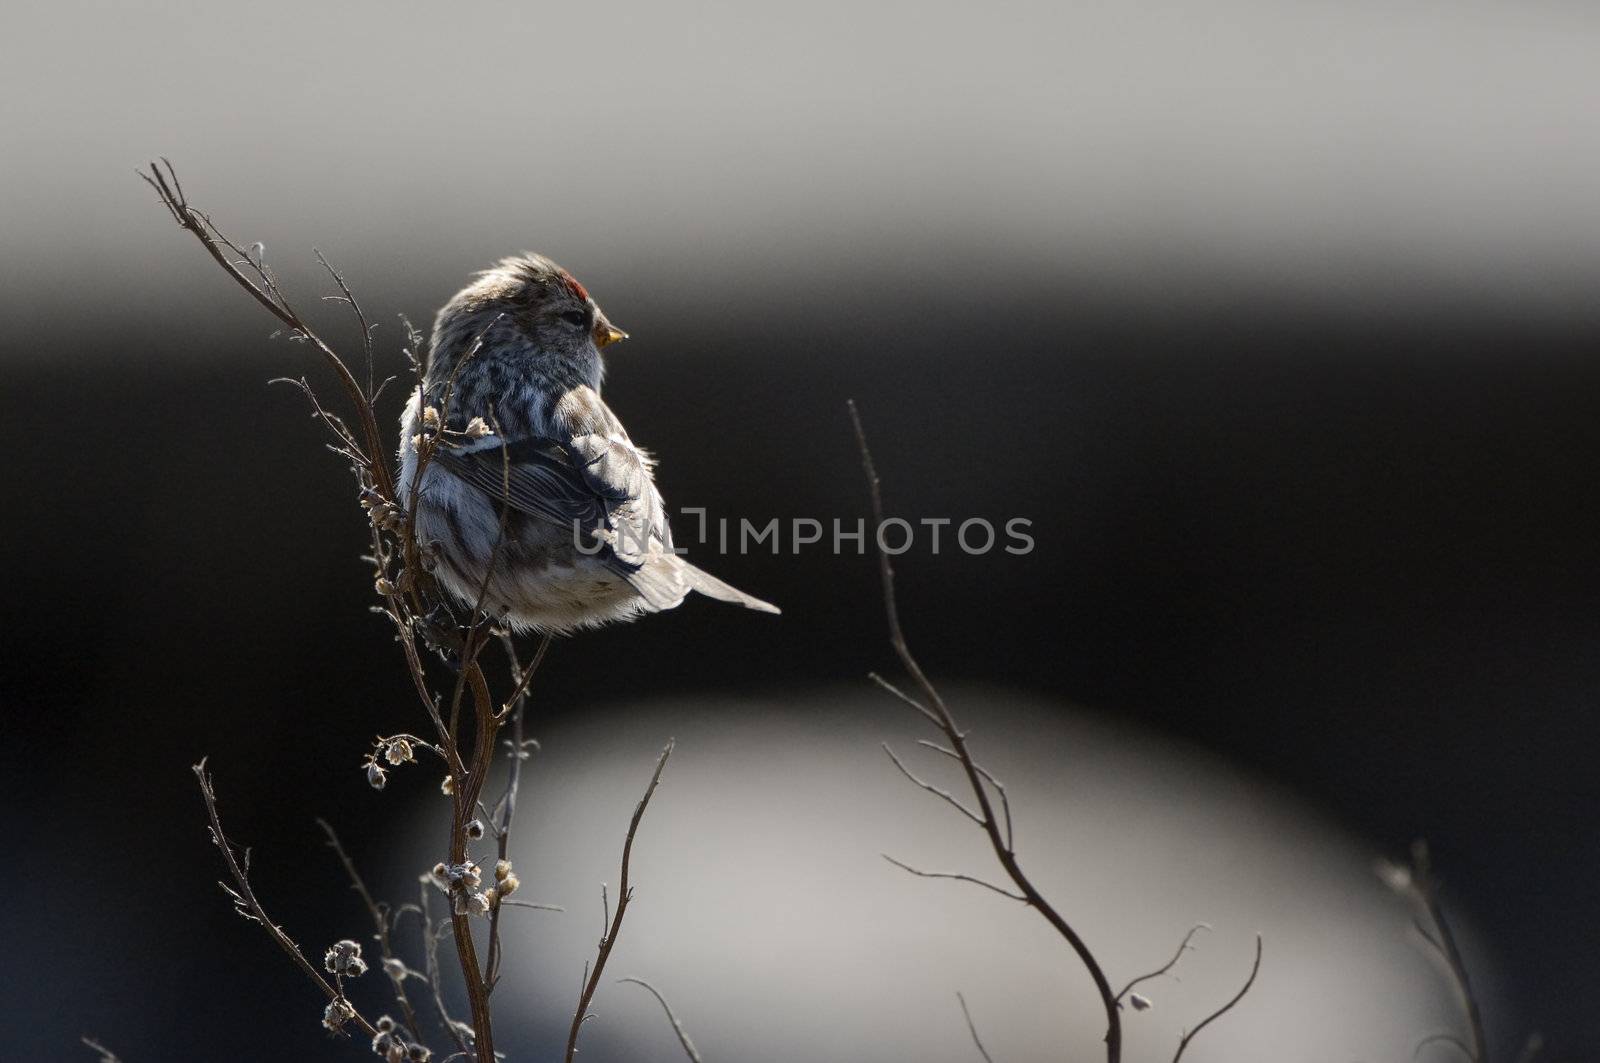 The Common Redpoll, Carduelis flammea, is a species in the finch family.